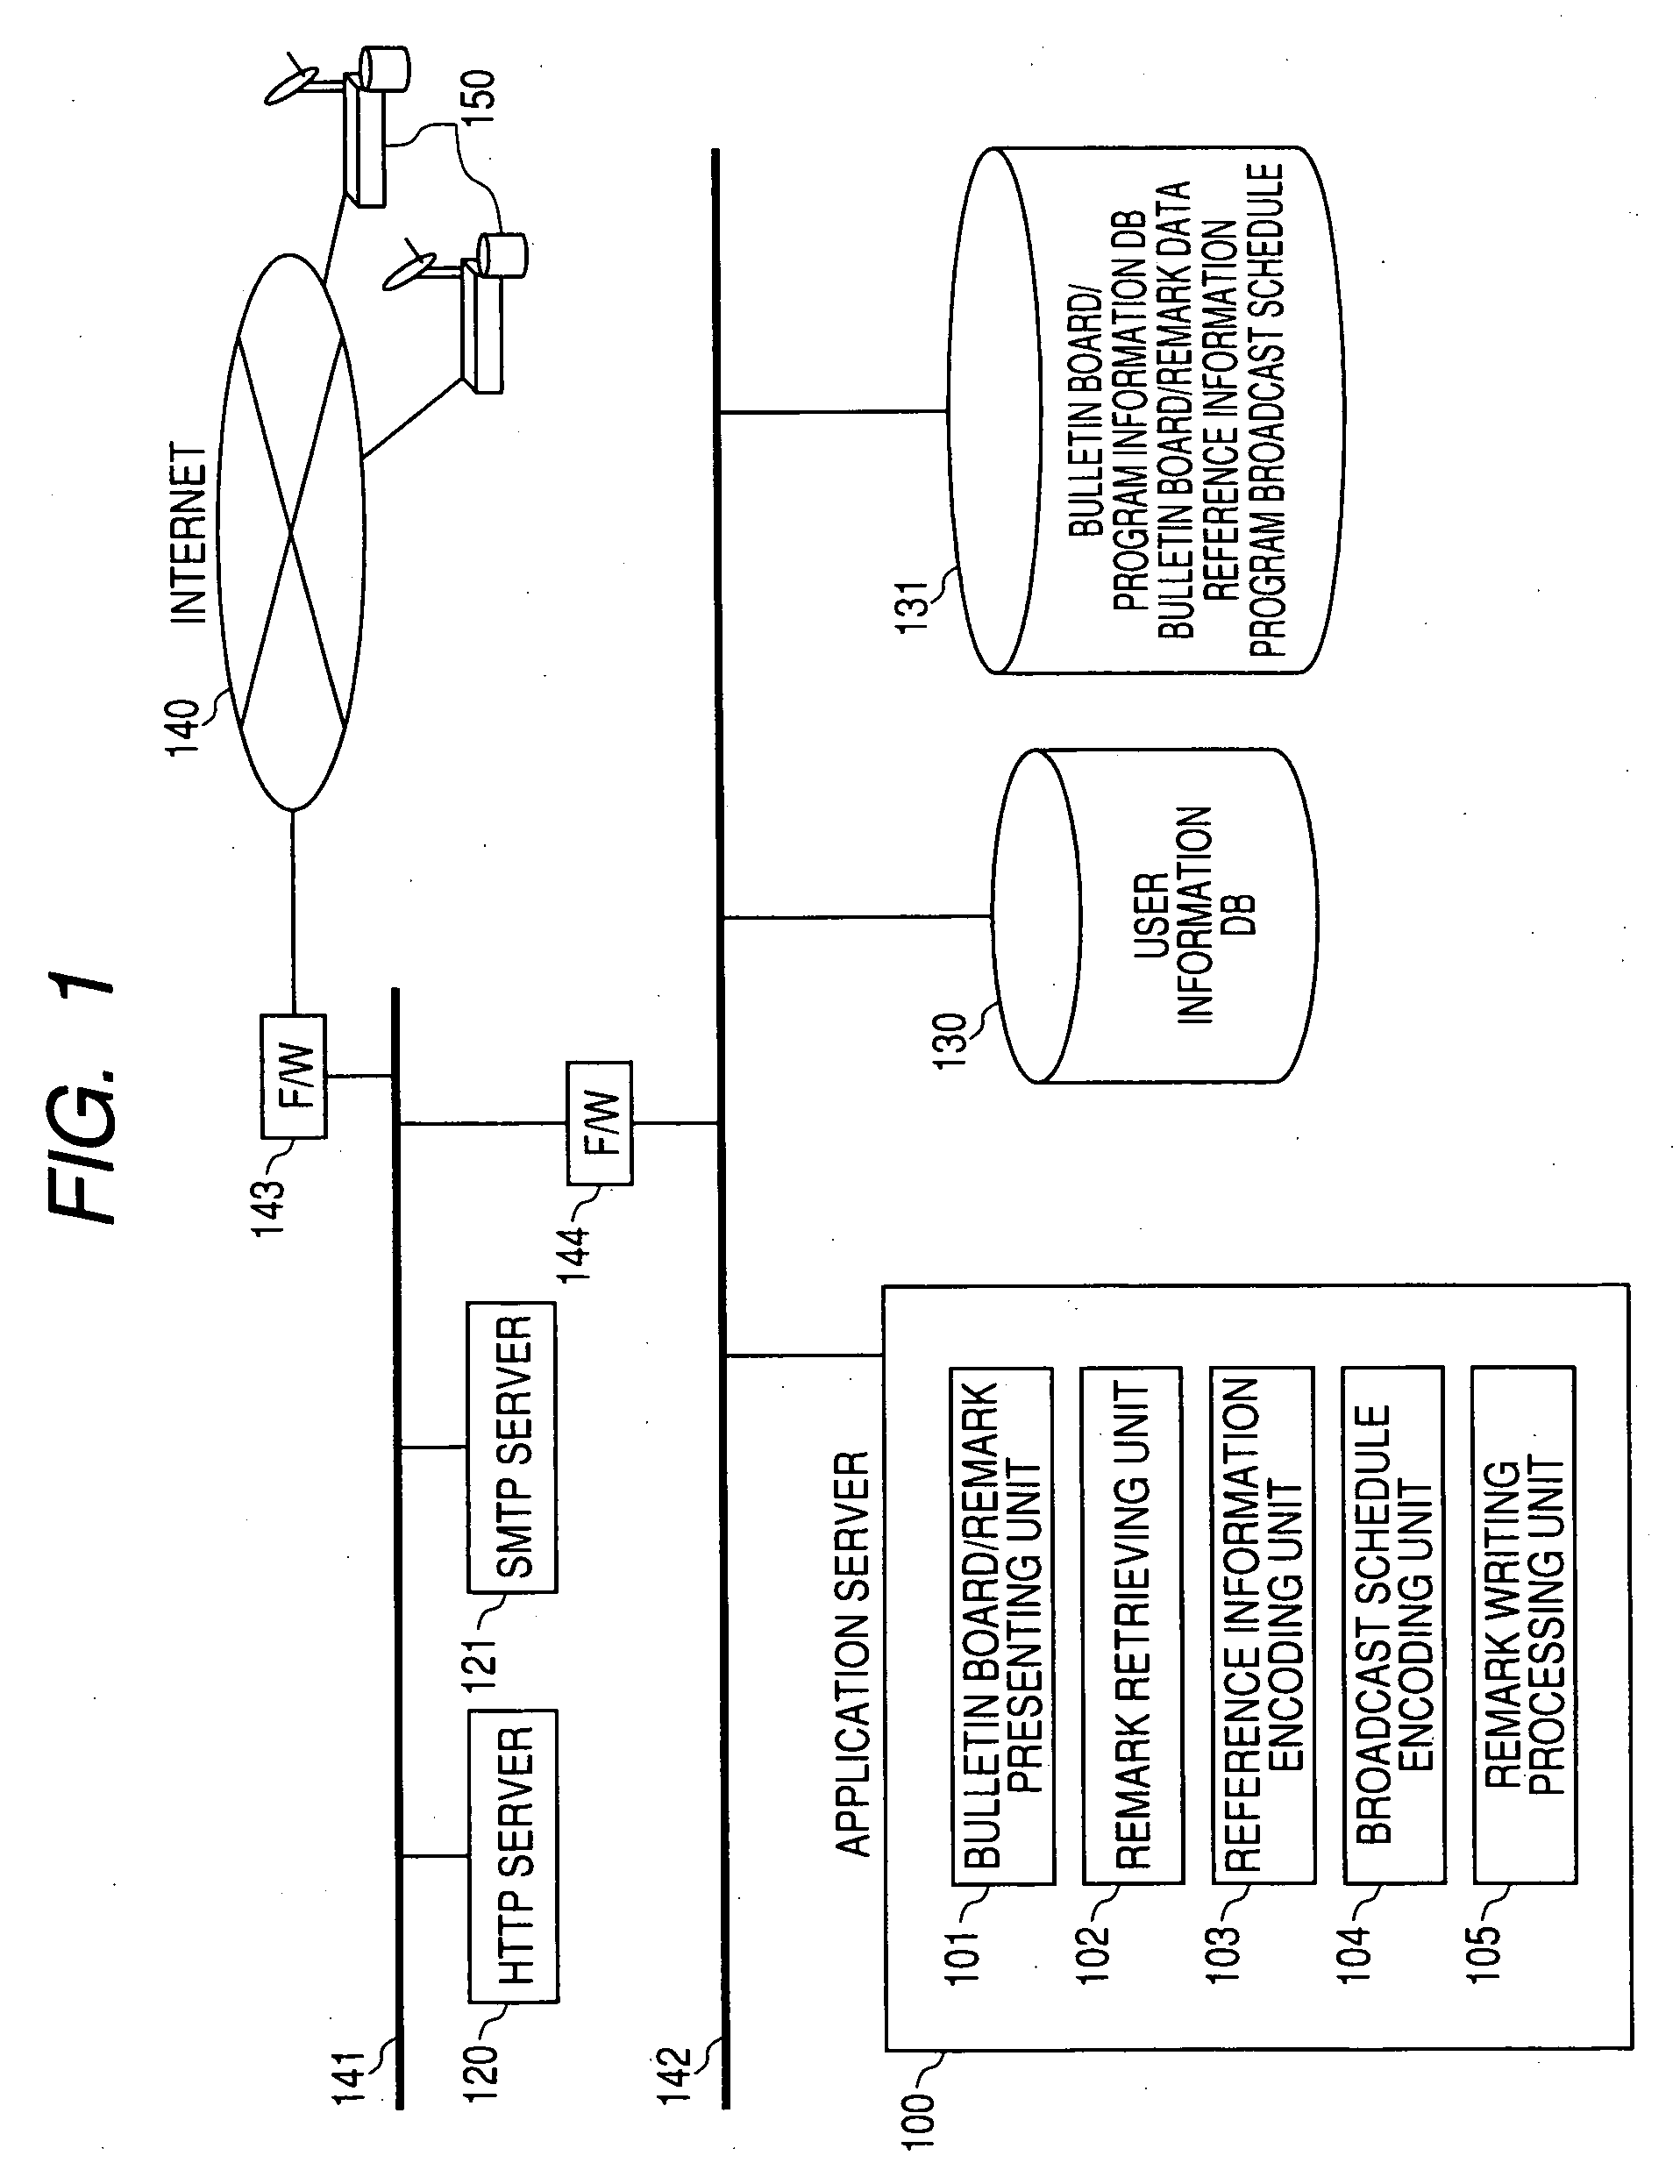 Content-related information providing apparatus, content related information providing method, electronic bulletin board system, and computer program